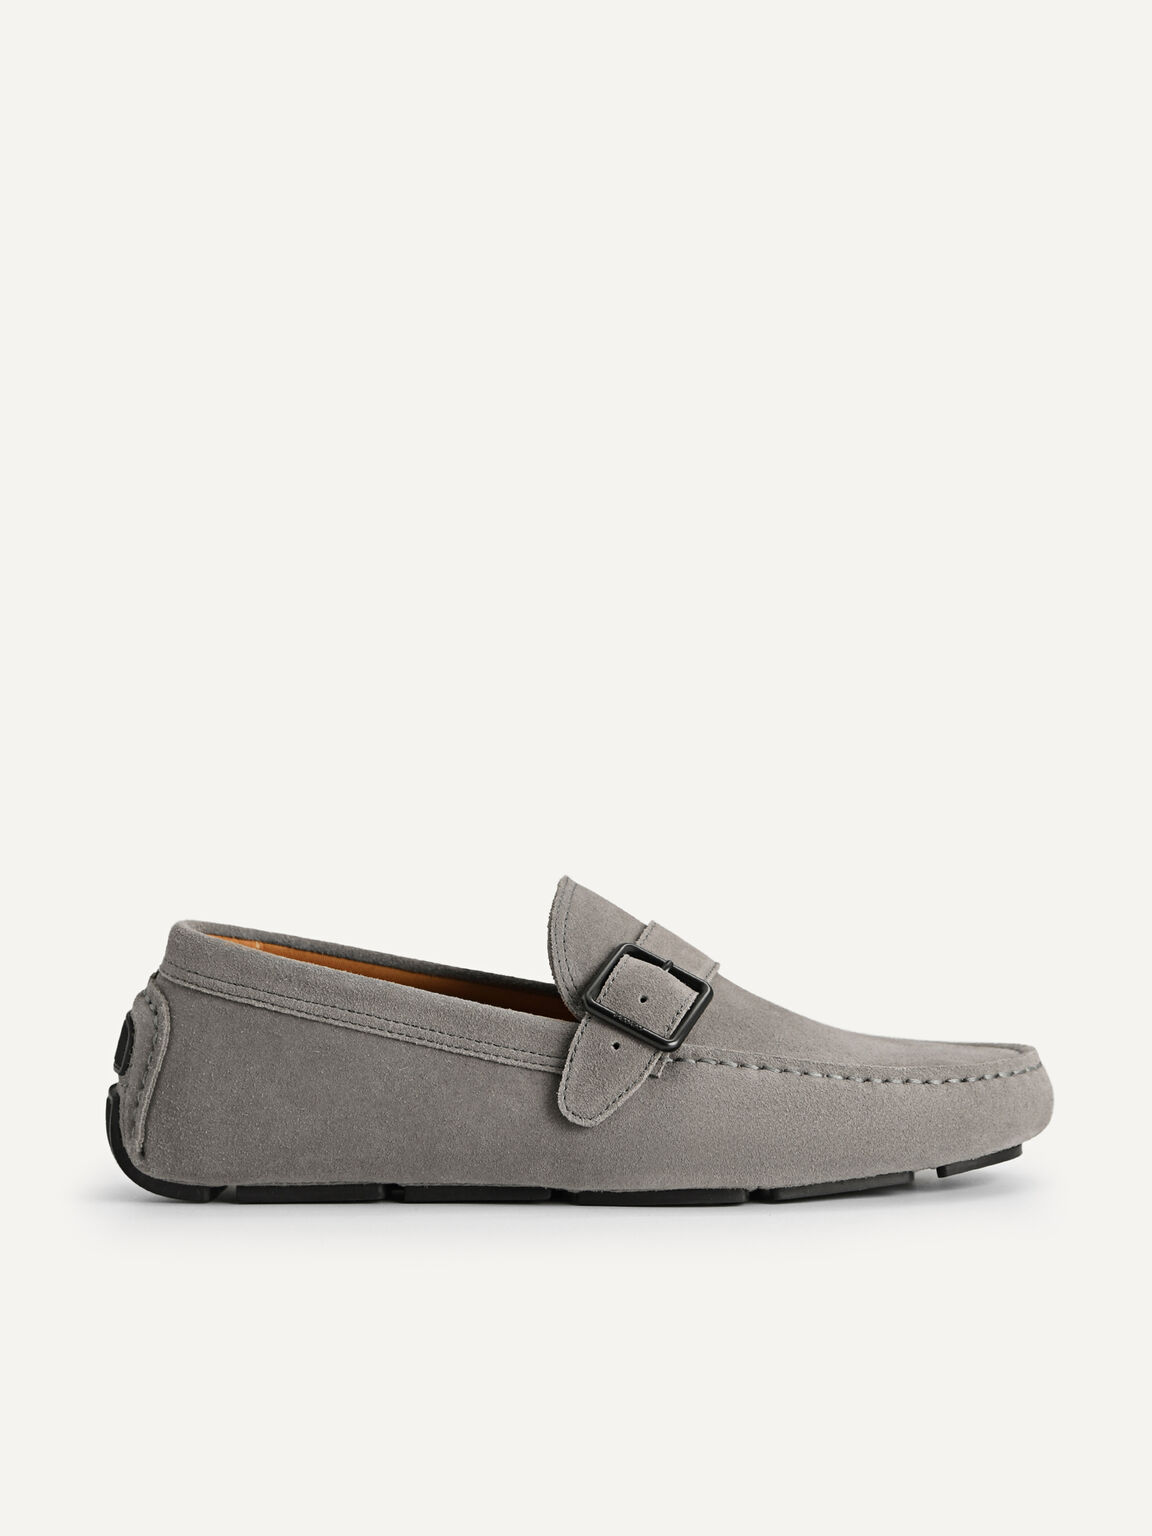 Suede Leather Moccasins with Buckle Detailing, Grey, hi-res